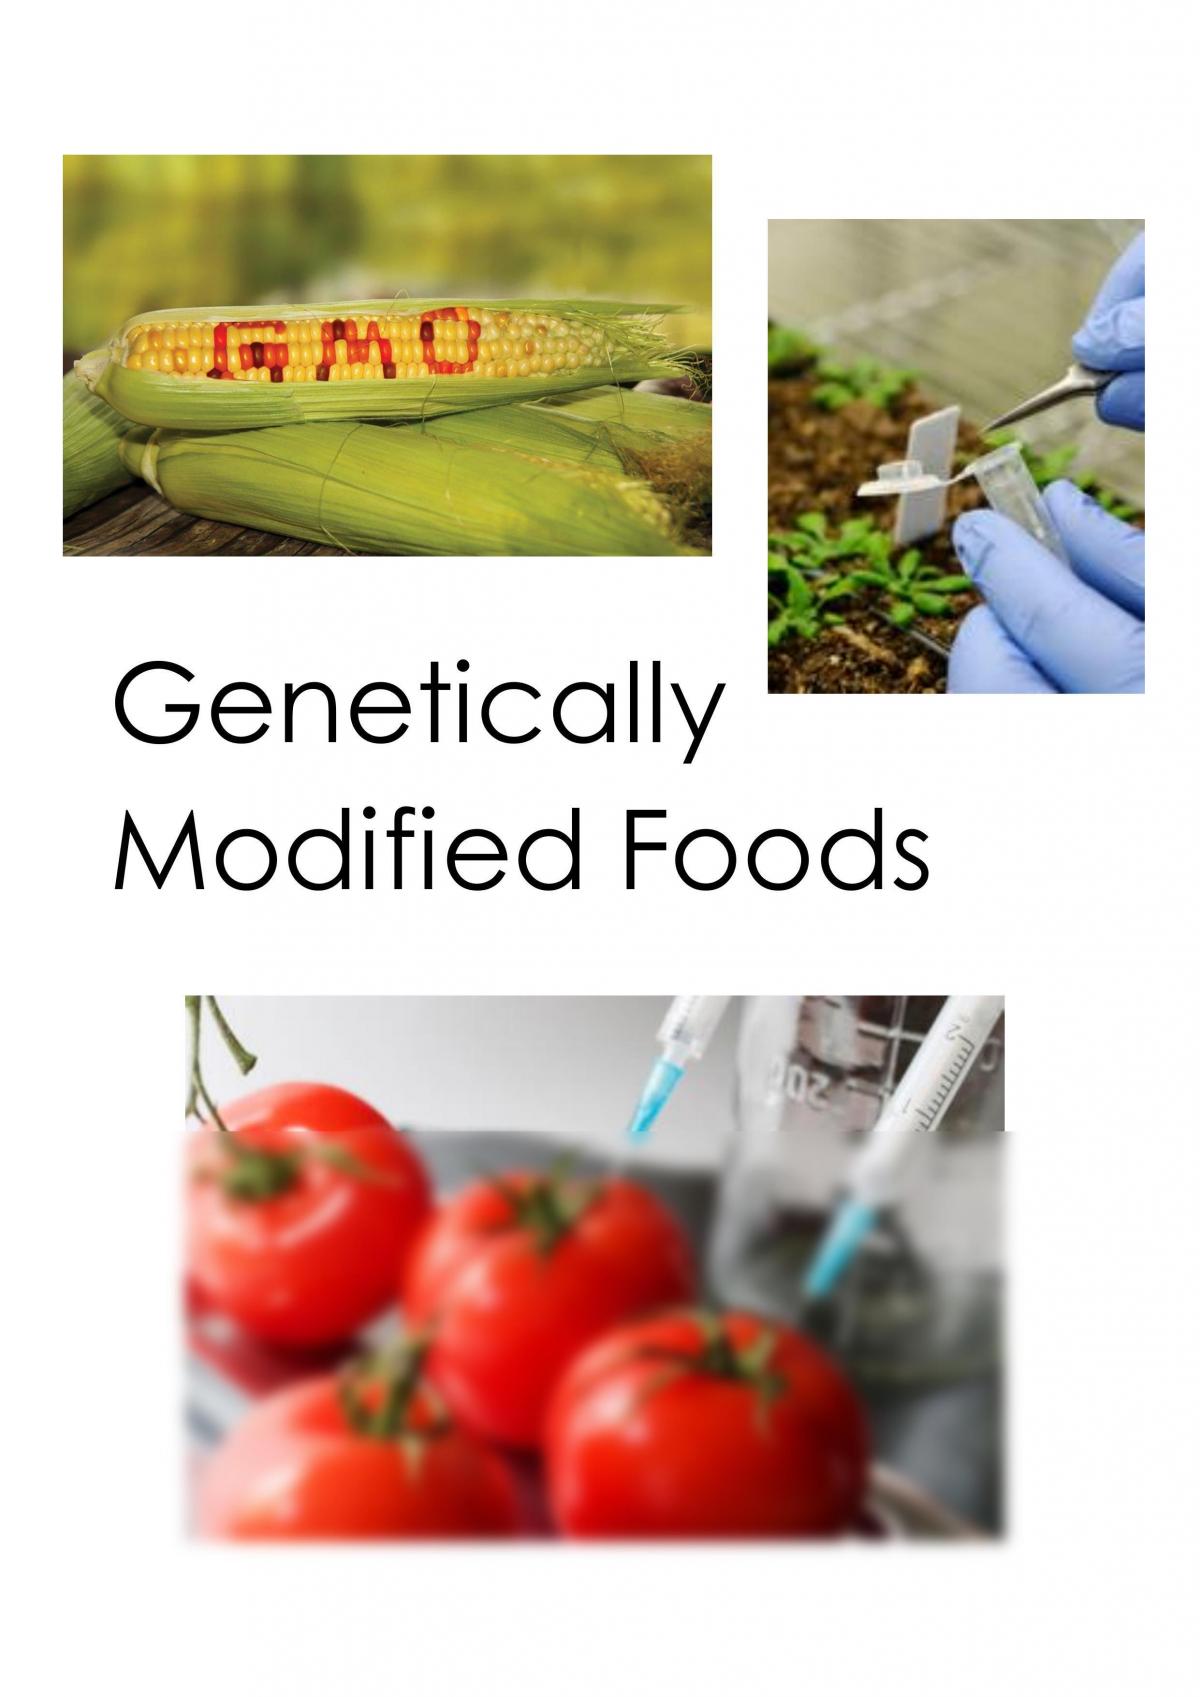 genetically modified food essay conclusion